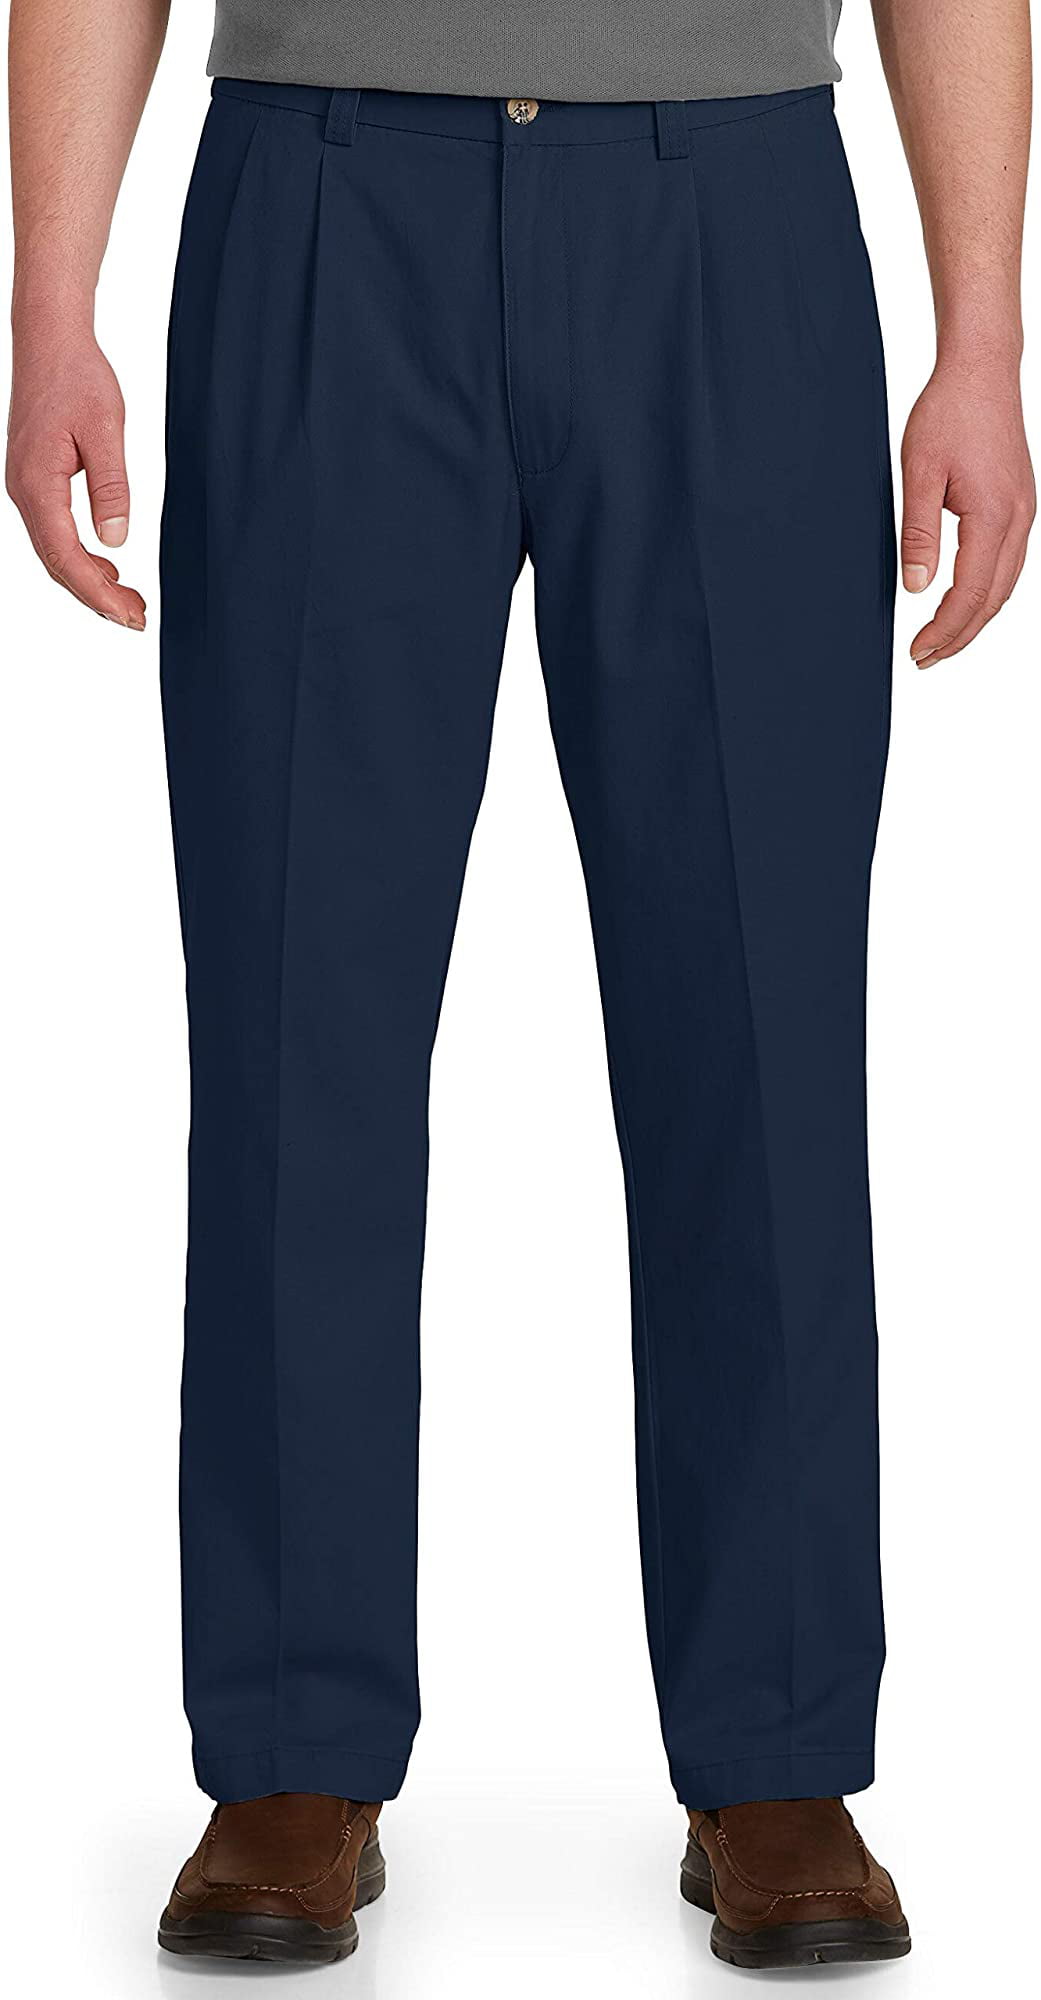 Harbor Bay by DXL Big and Tall Waist-Relaxer Pants8211; Unhemmed 